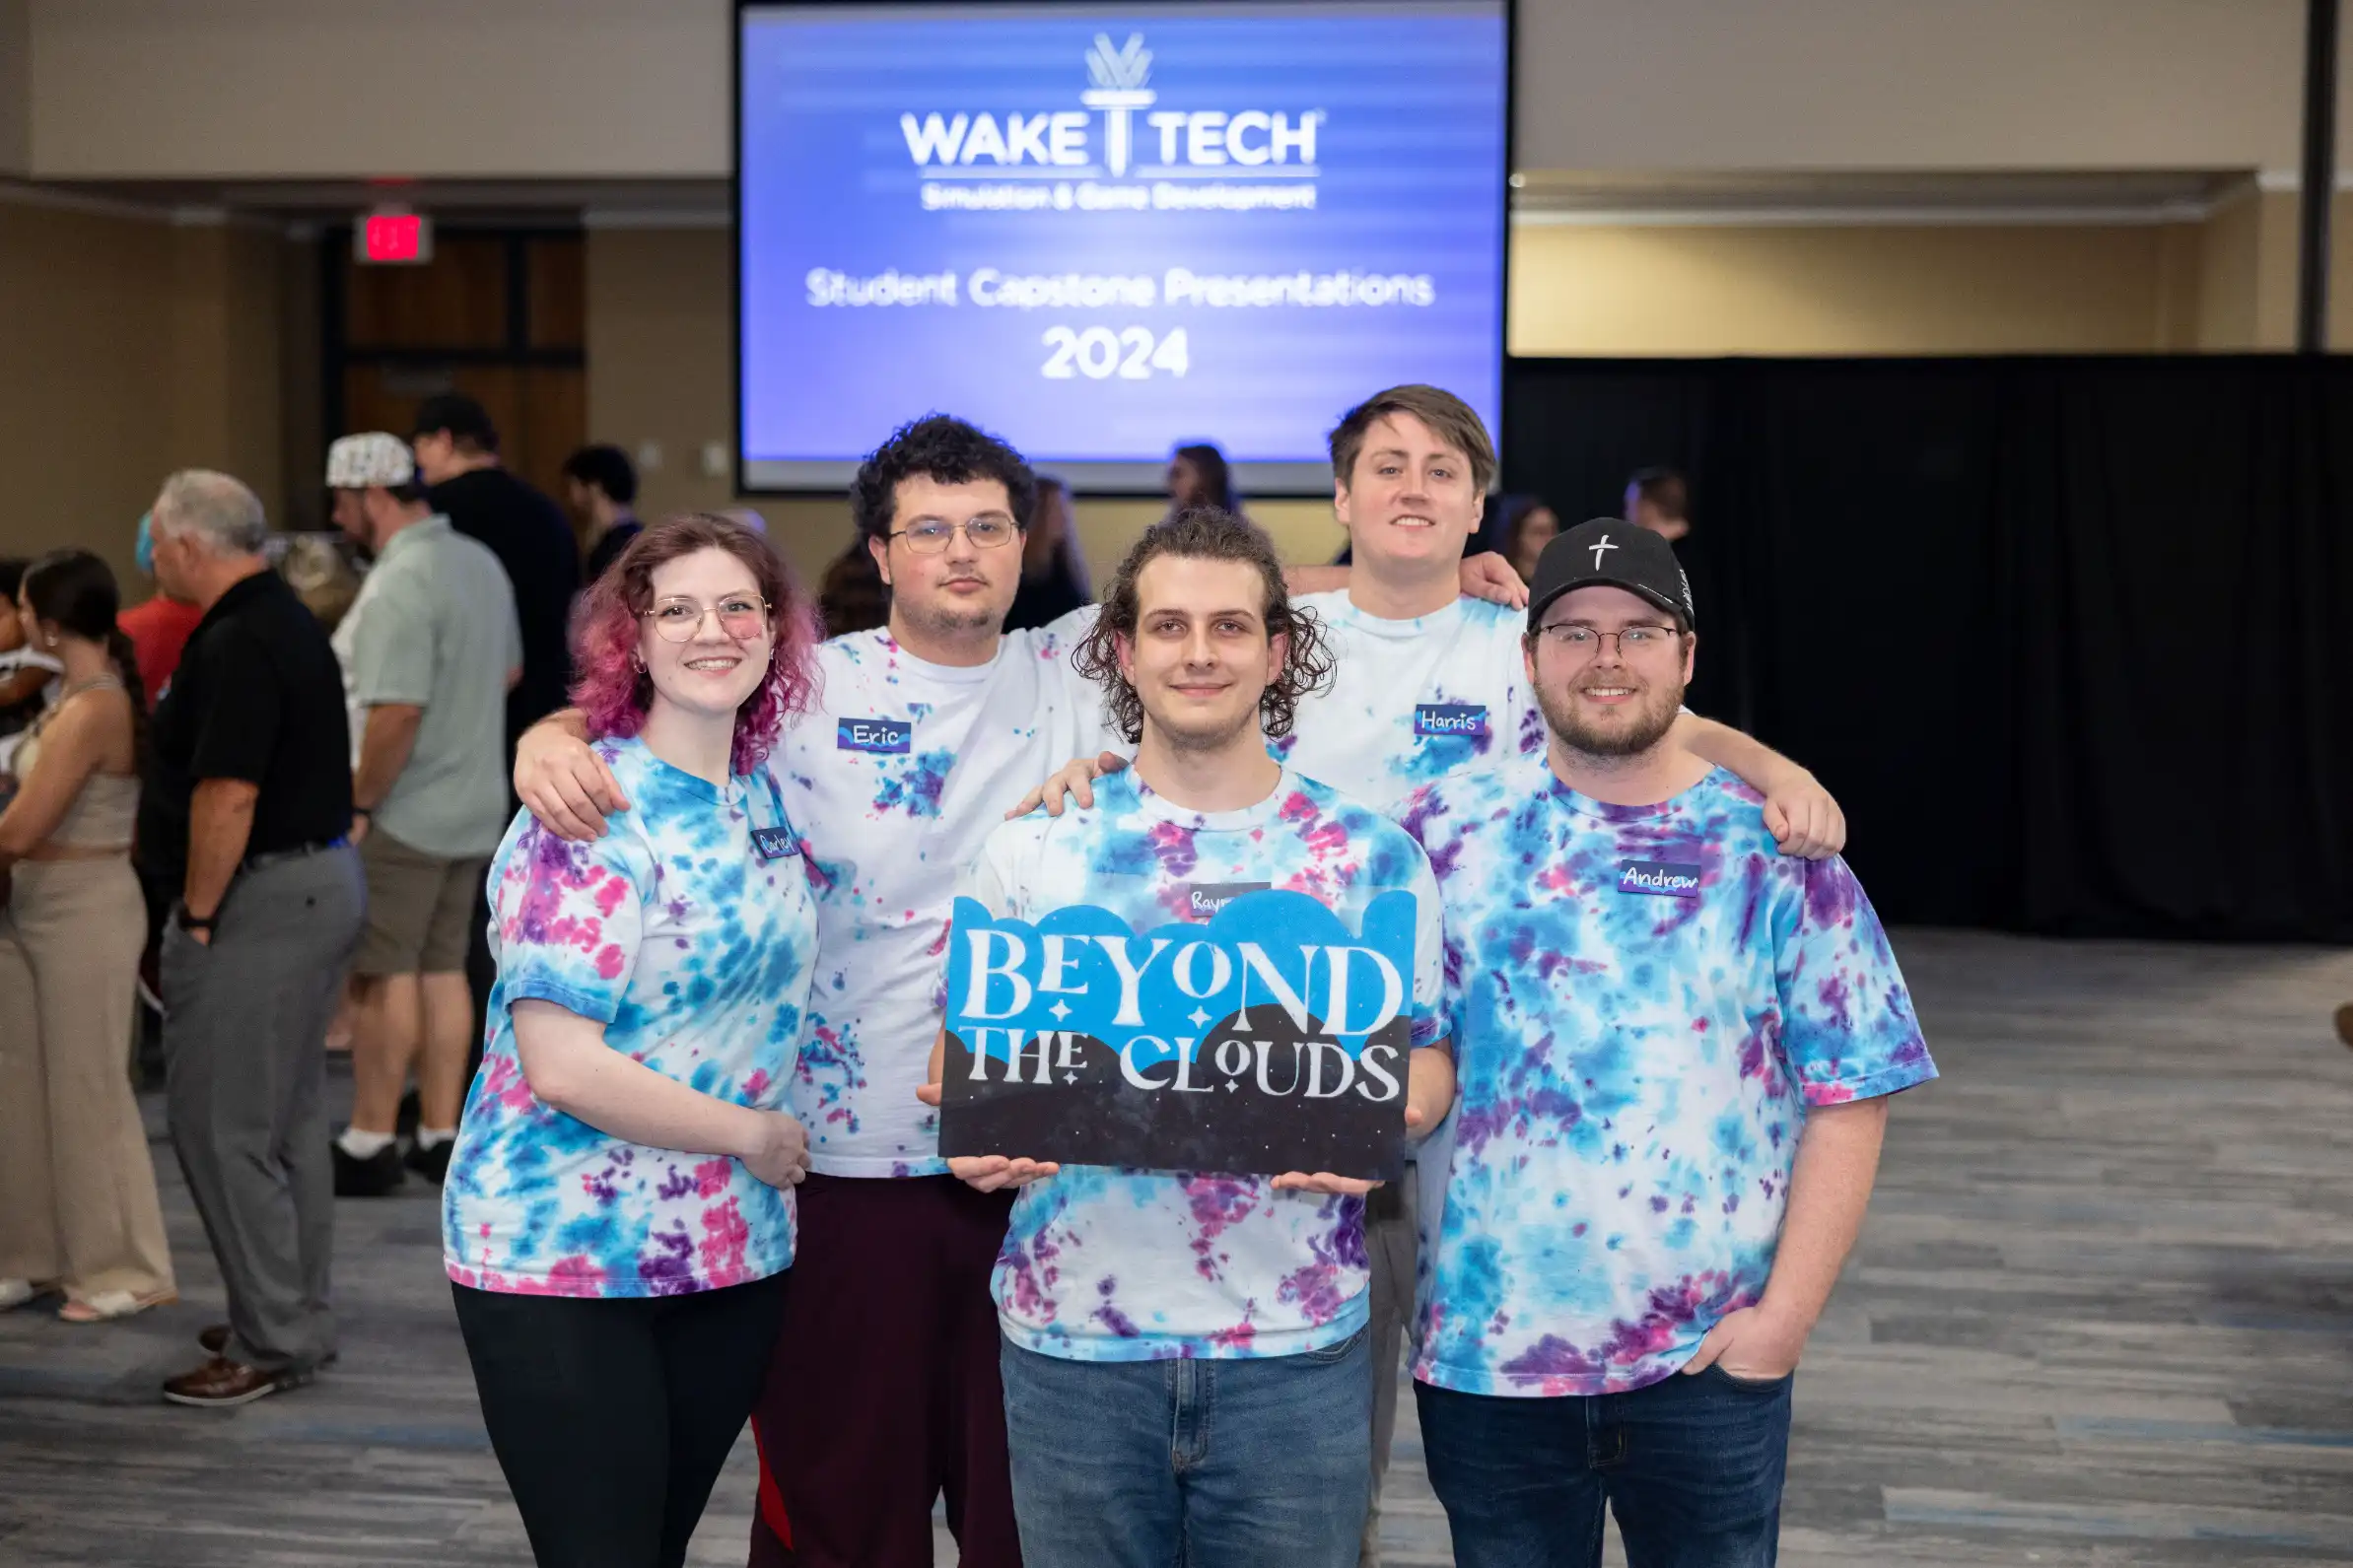 A team of Wake Tech students created Beyond the Clouds, an original video game that was demonstrated at the Simulation and Game Development program's annual student showcase.